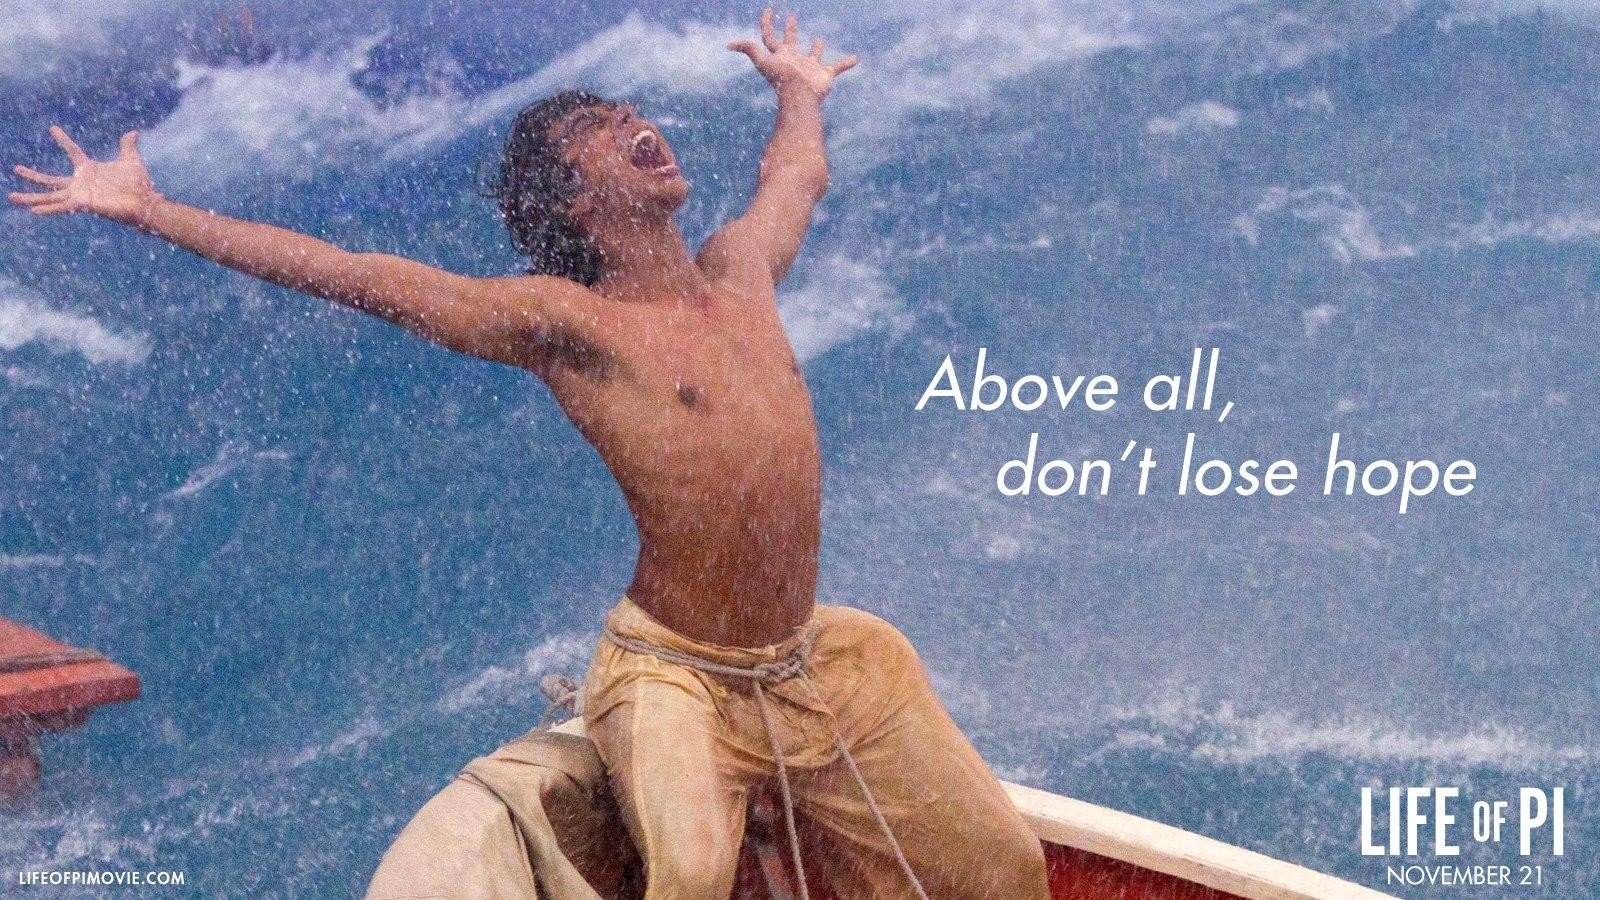 Awesome Life Of Pi Free Wallpaper Id - All Dont Lose Hope Life Of Pi - HD Wallpaper 